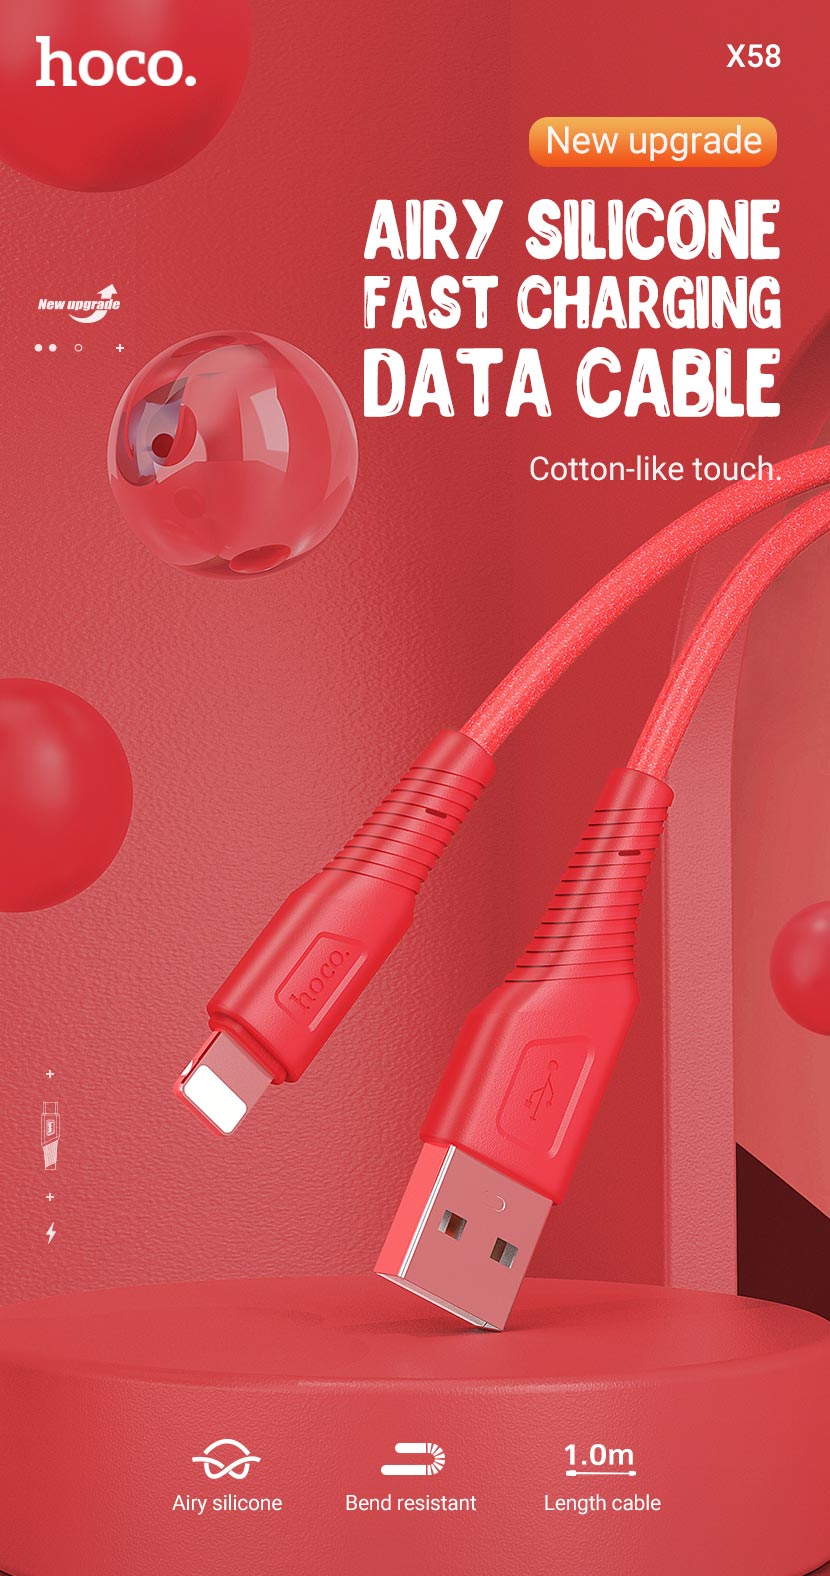 hoco news x58 airy silicone charging data cable en